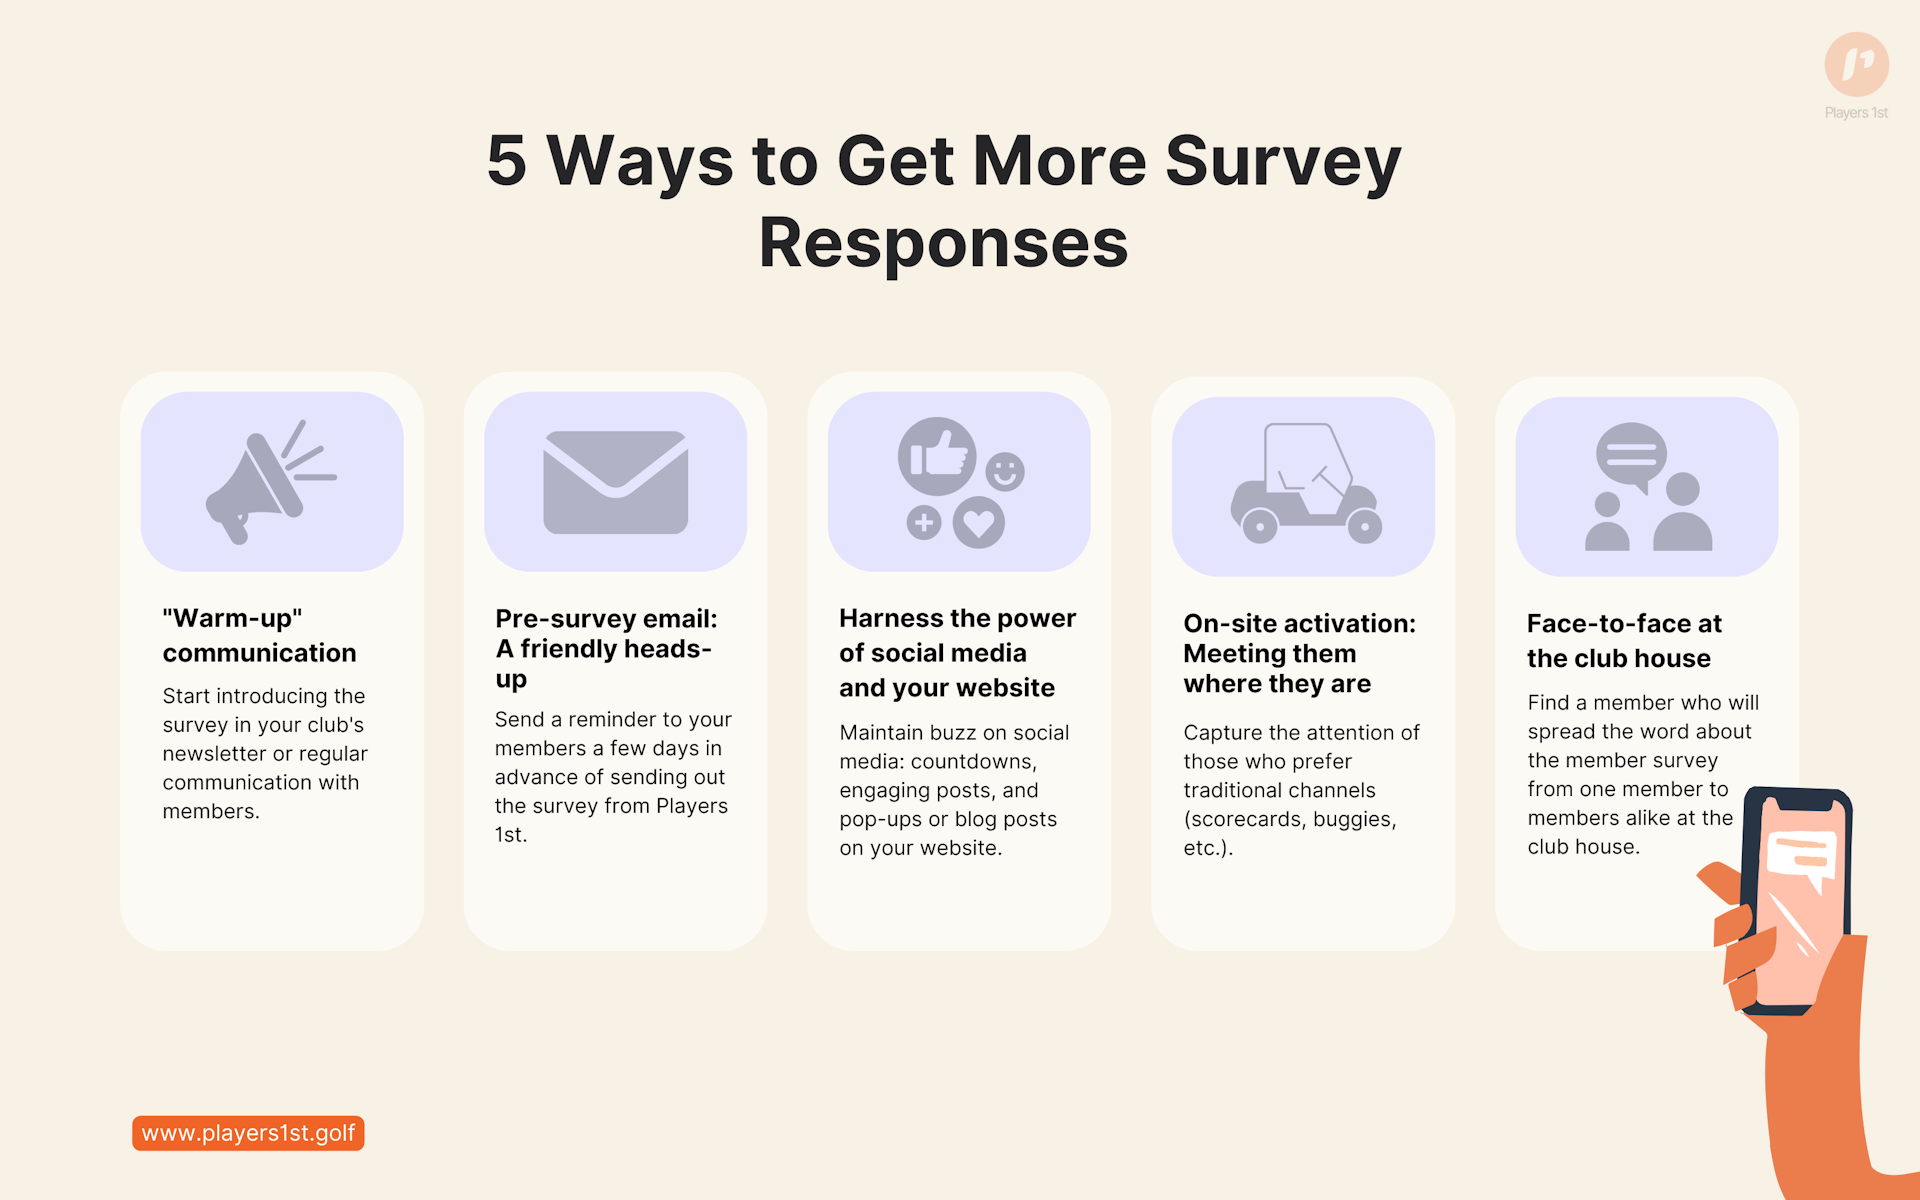 5 ways to increase survey response rate at golf clubs - Players 1st.